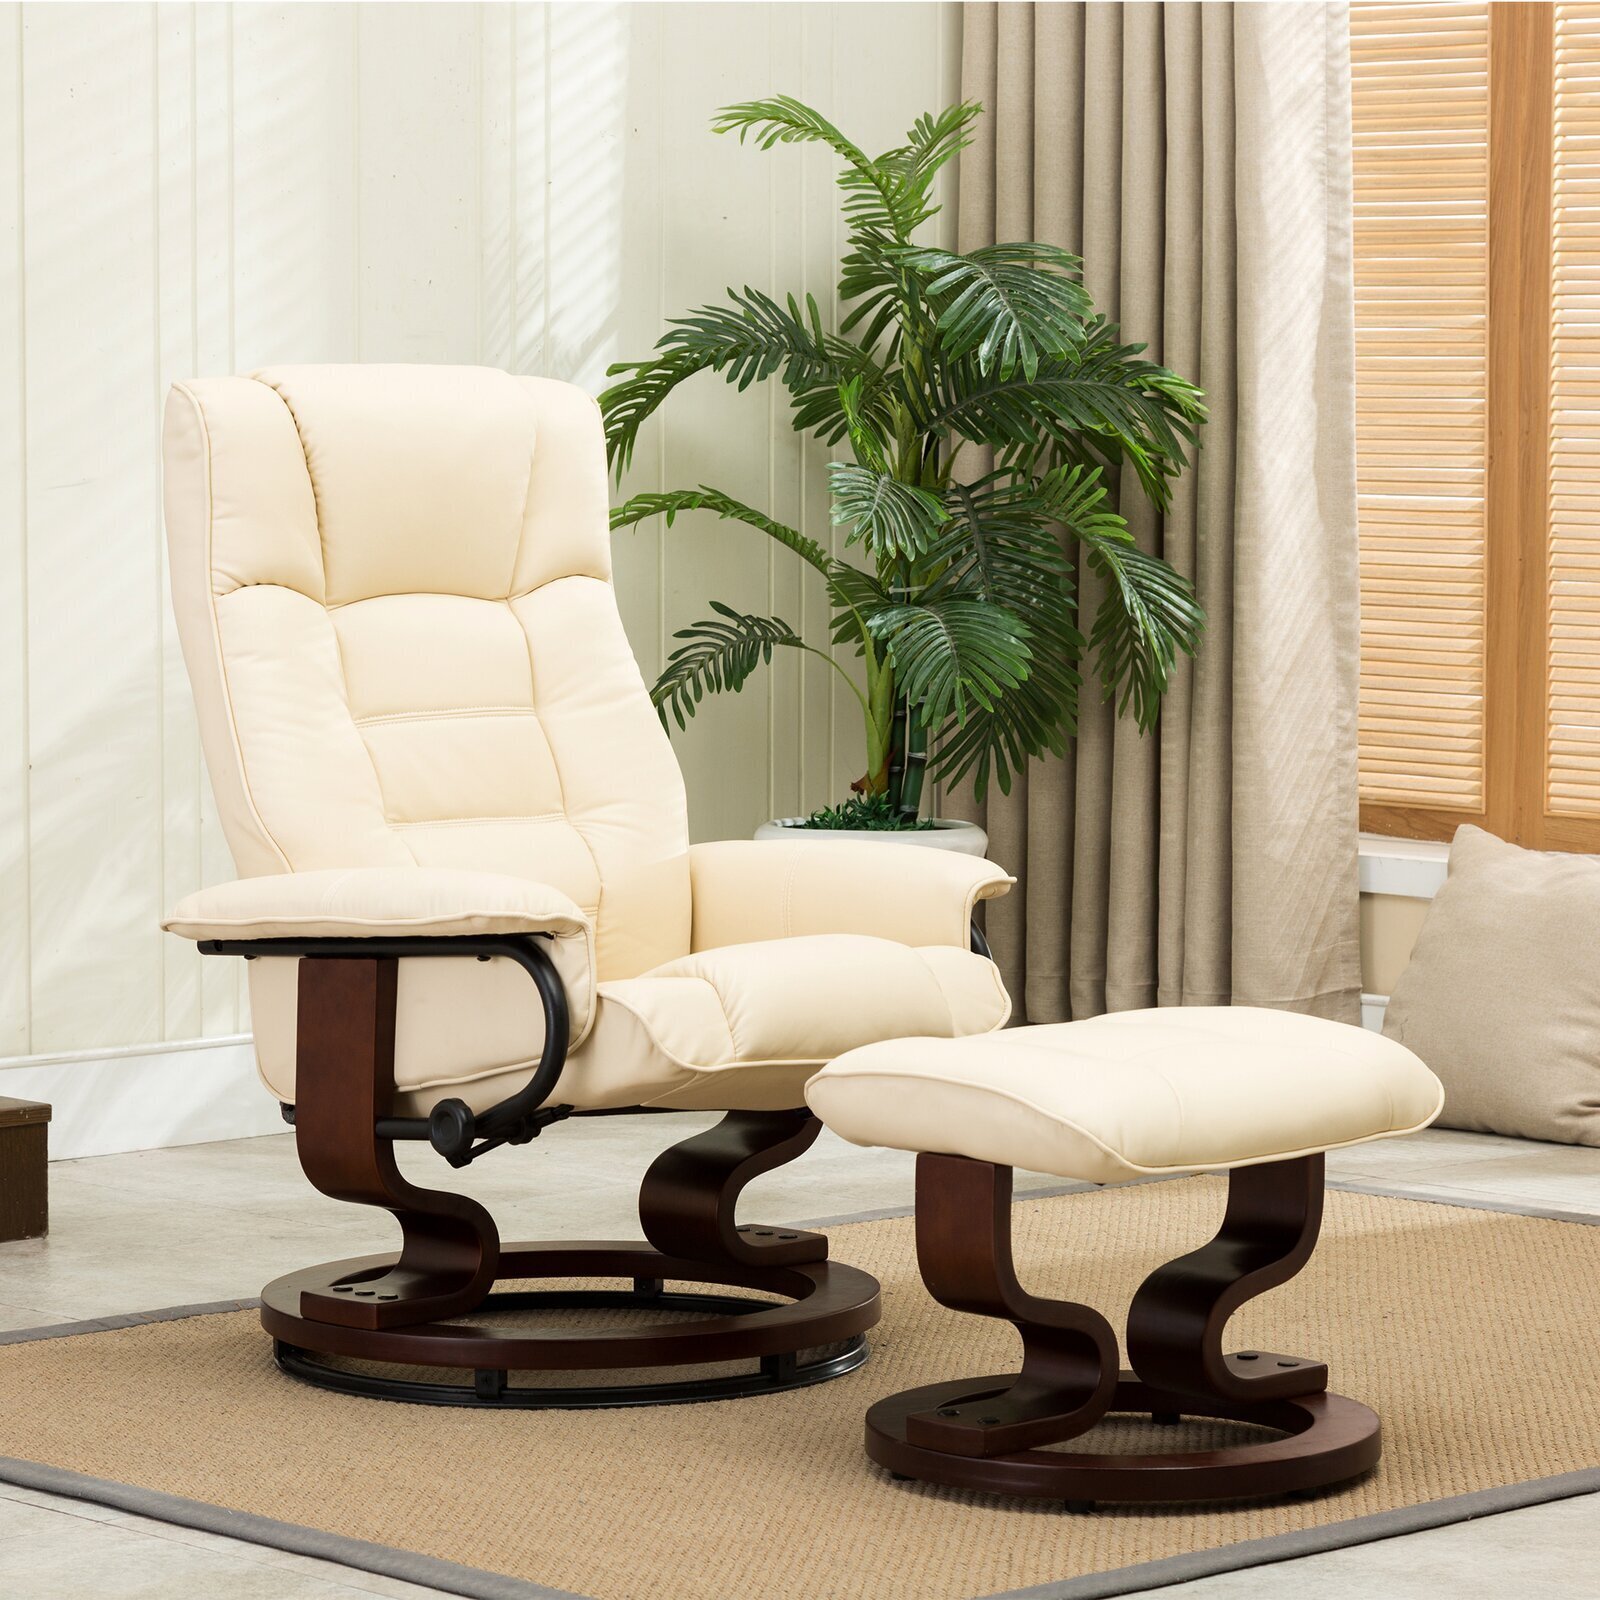 Ergonomic leather recliner with ottoman and plush seating perfect for a home theatre 